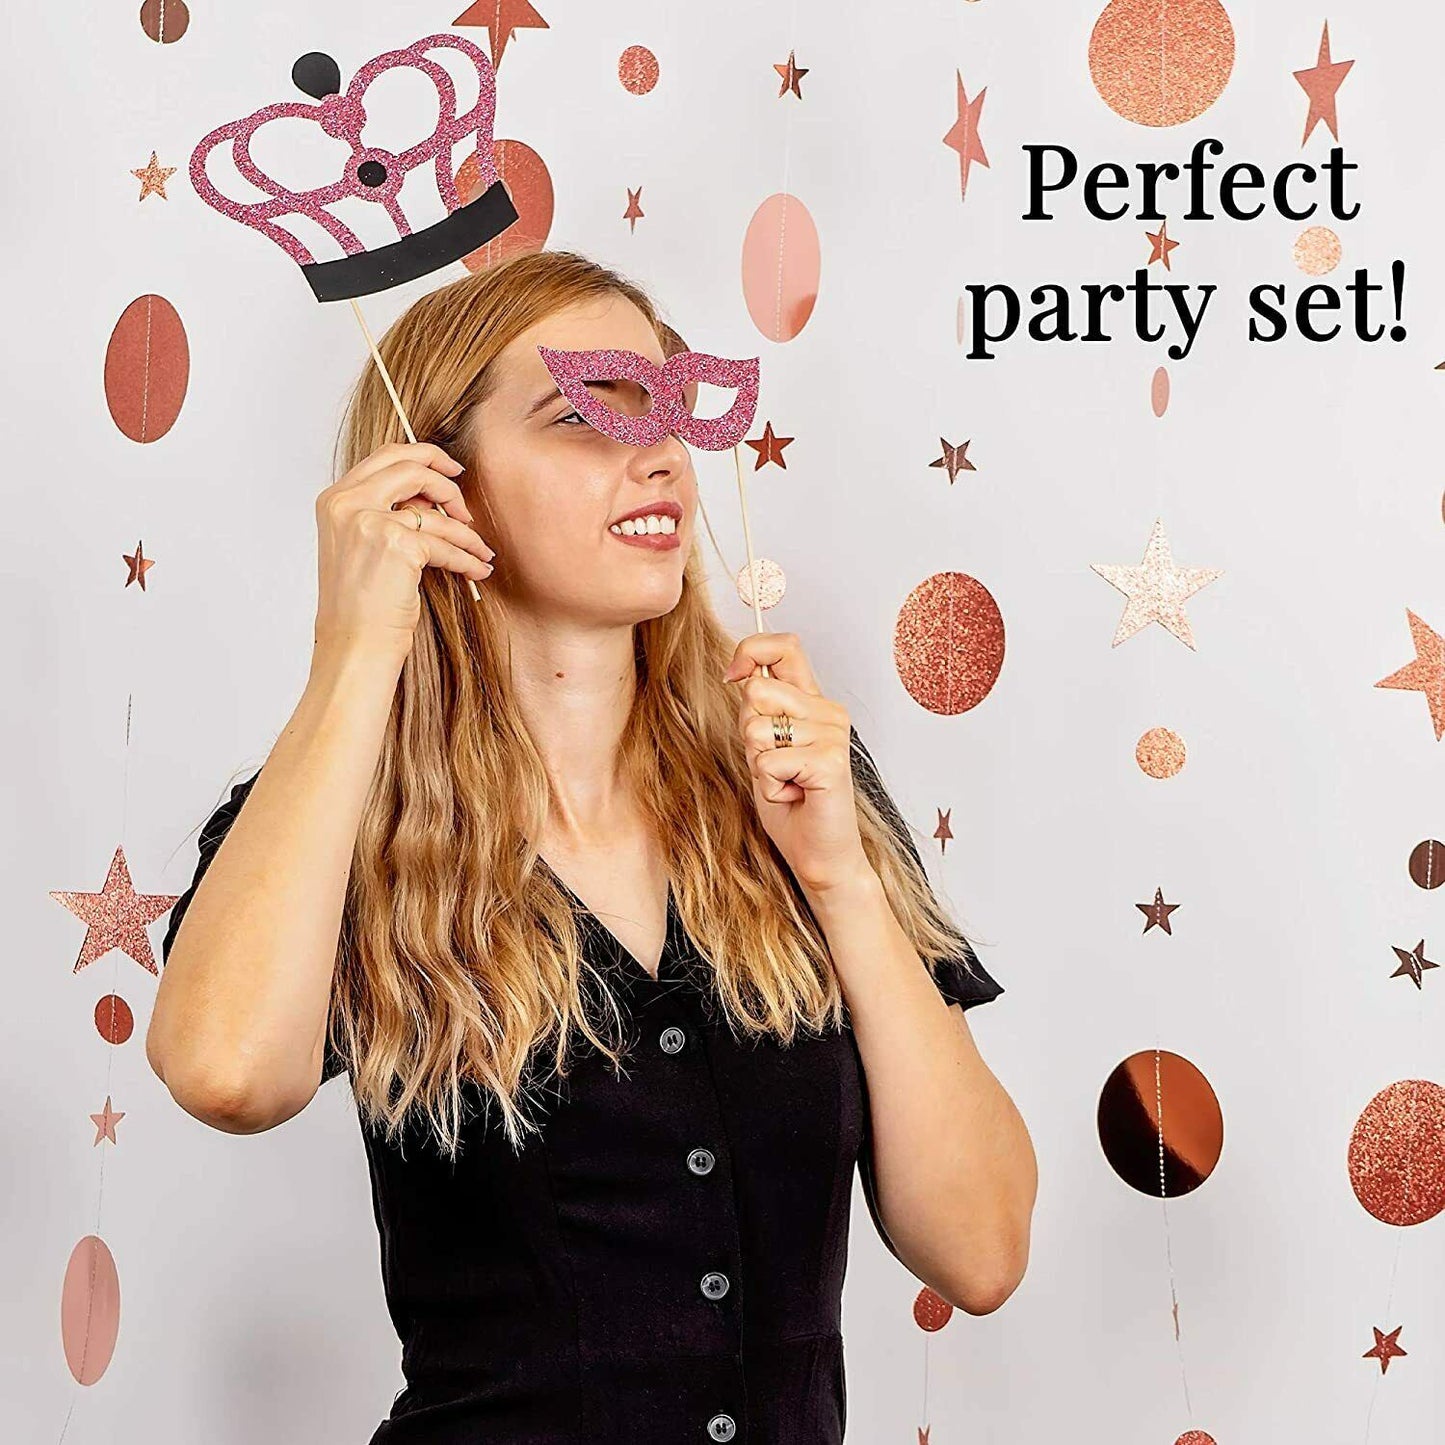 Photo Booth Props Gold Glitter 16 Pcs Photobooth Party Birthday,Graduation